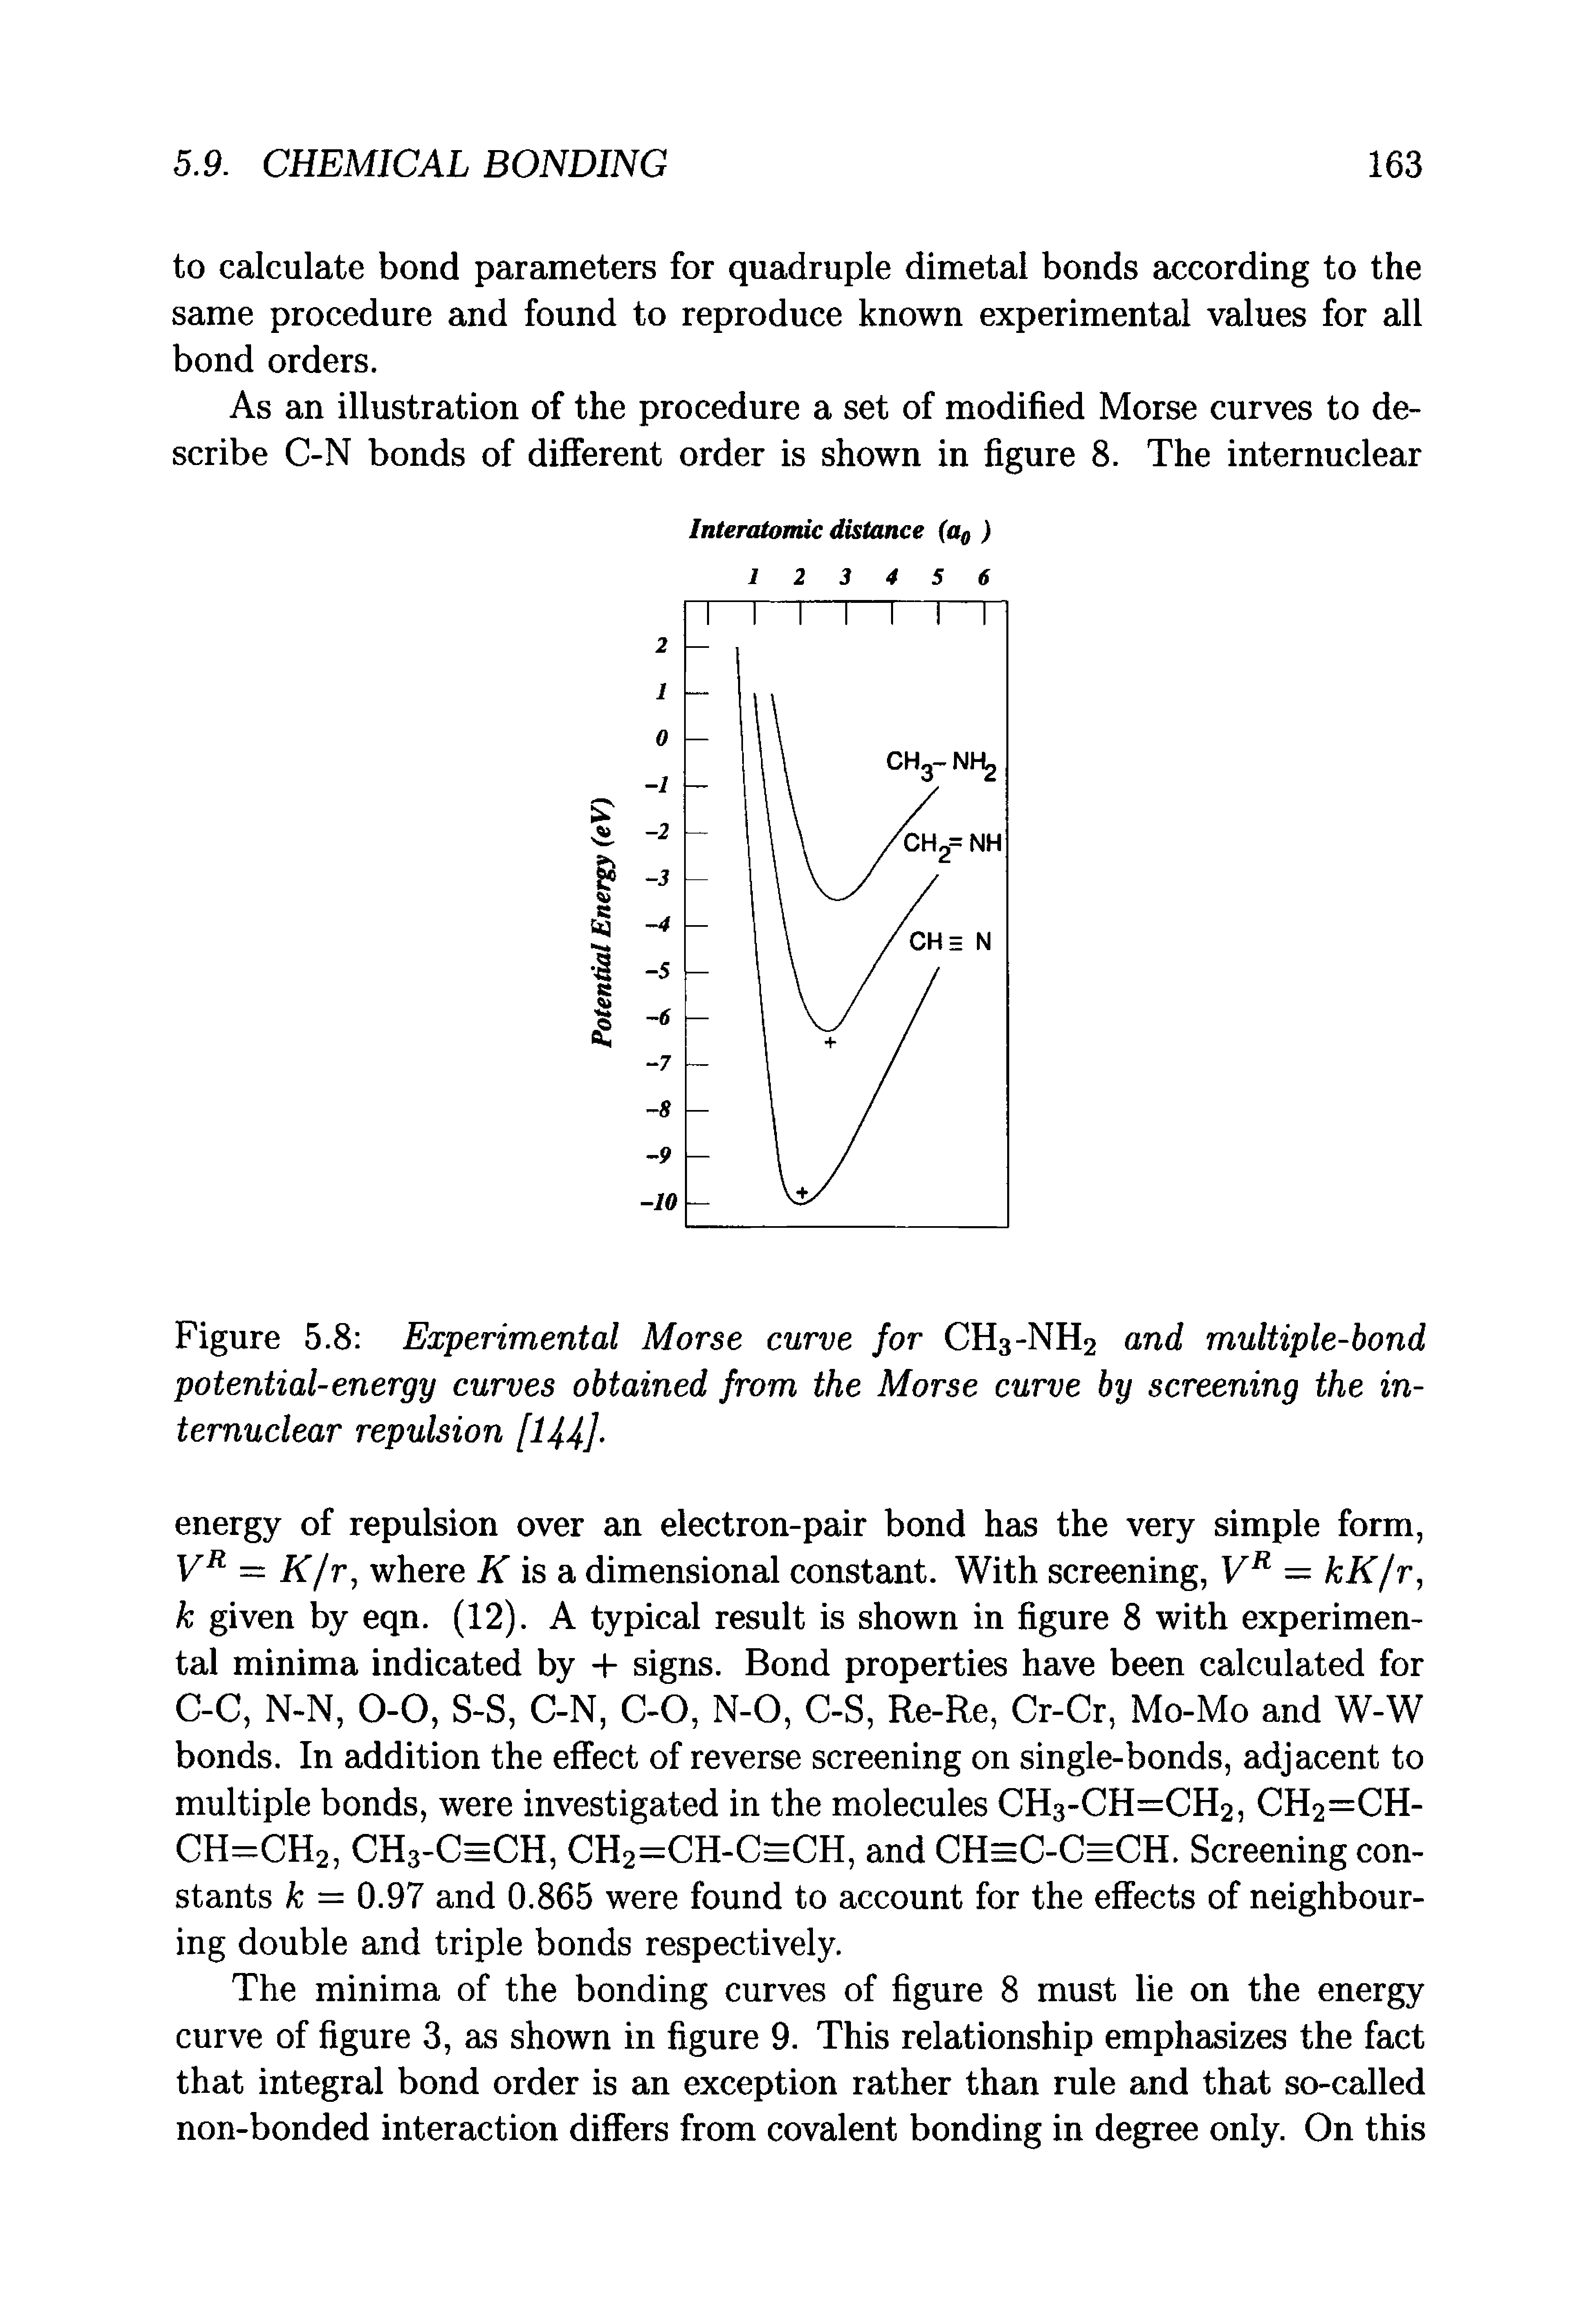 Figure 5.8 Experimental Morse curve for CH3-NH2 and multiple-bond potential-energy curves obtained from the Morse curve by screening the in-temuclear repulsion [144]-...